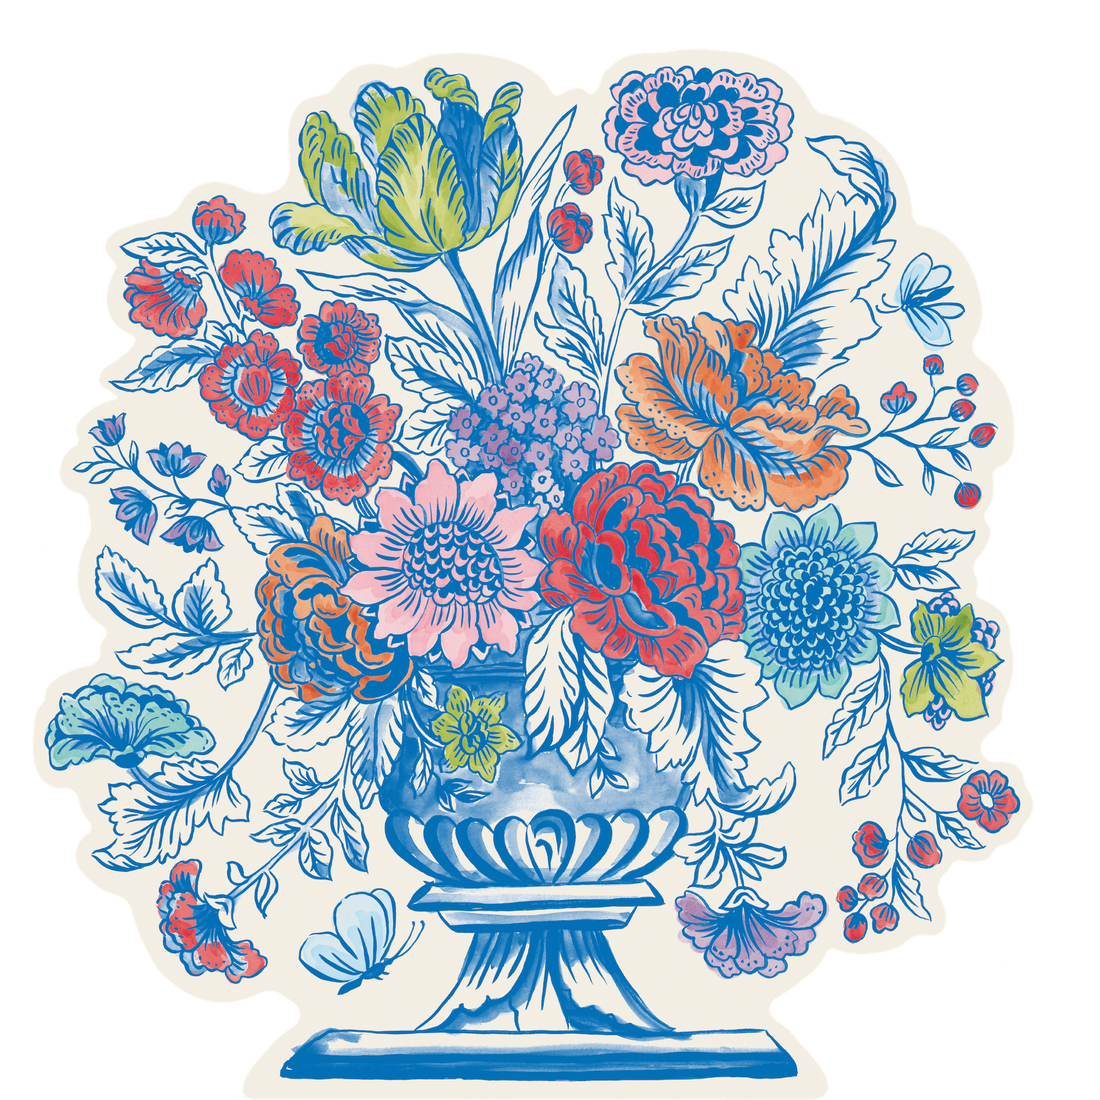 Blue French Toile Paper Party Dinnerware – Hester & Cook